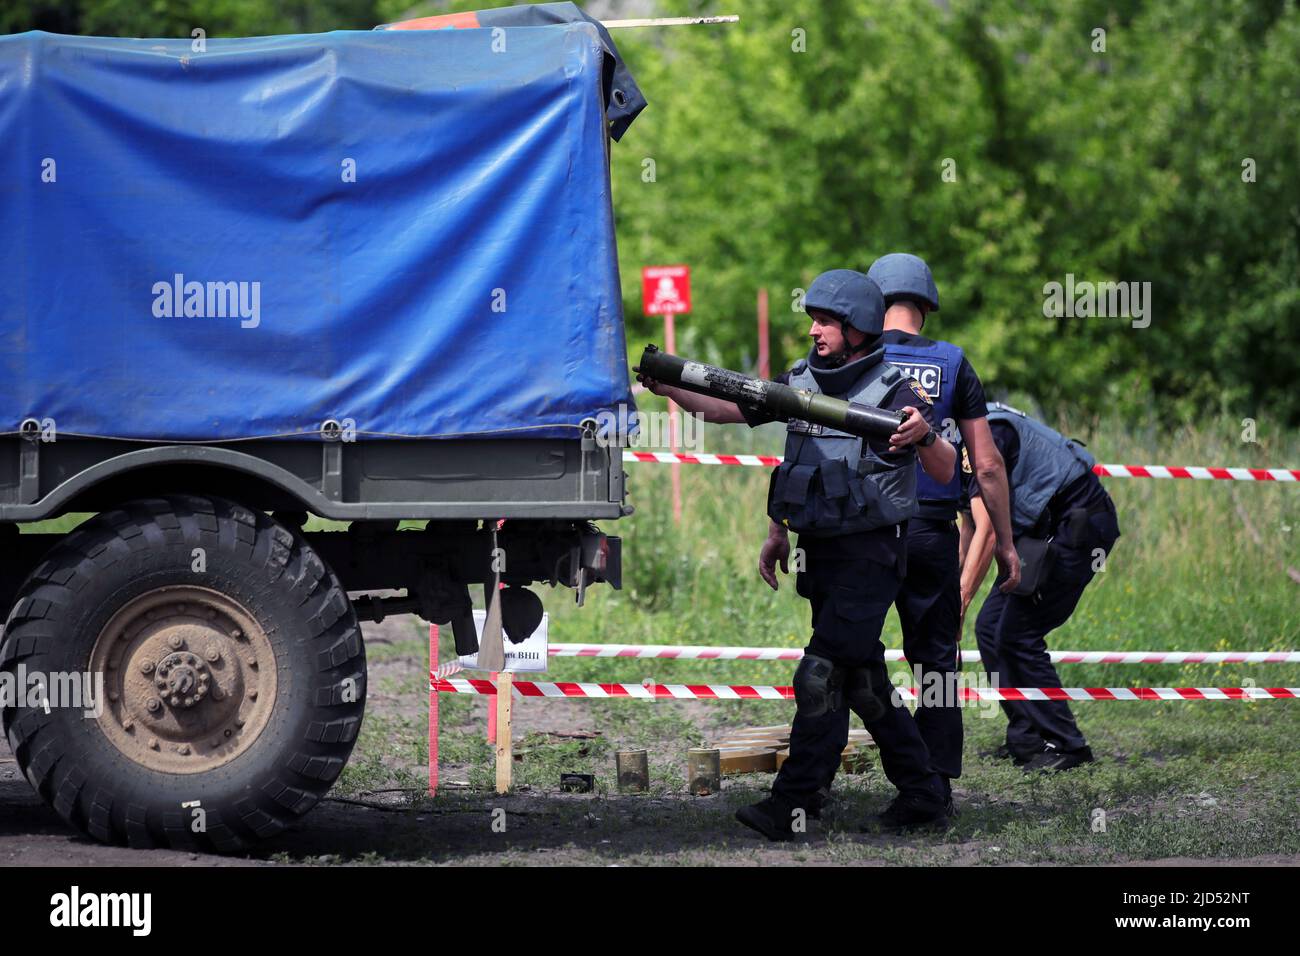 TROSTIANETS, UKRAINE - JUNE 17, 2022 - A rescuer puts an item into a truck on the premises of a brick plant where lots of ammunition and other explosi Stock Photo